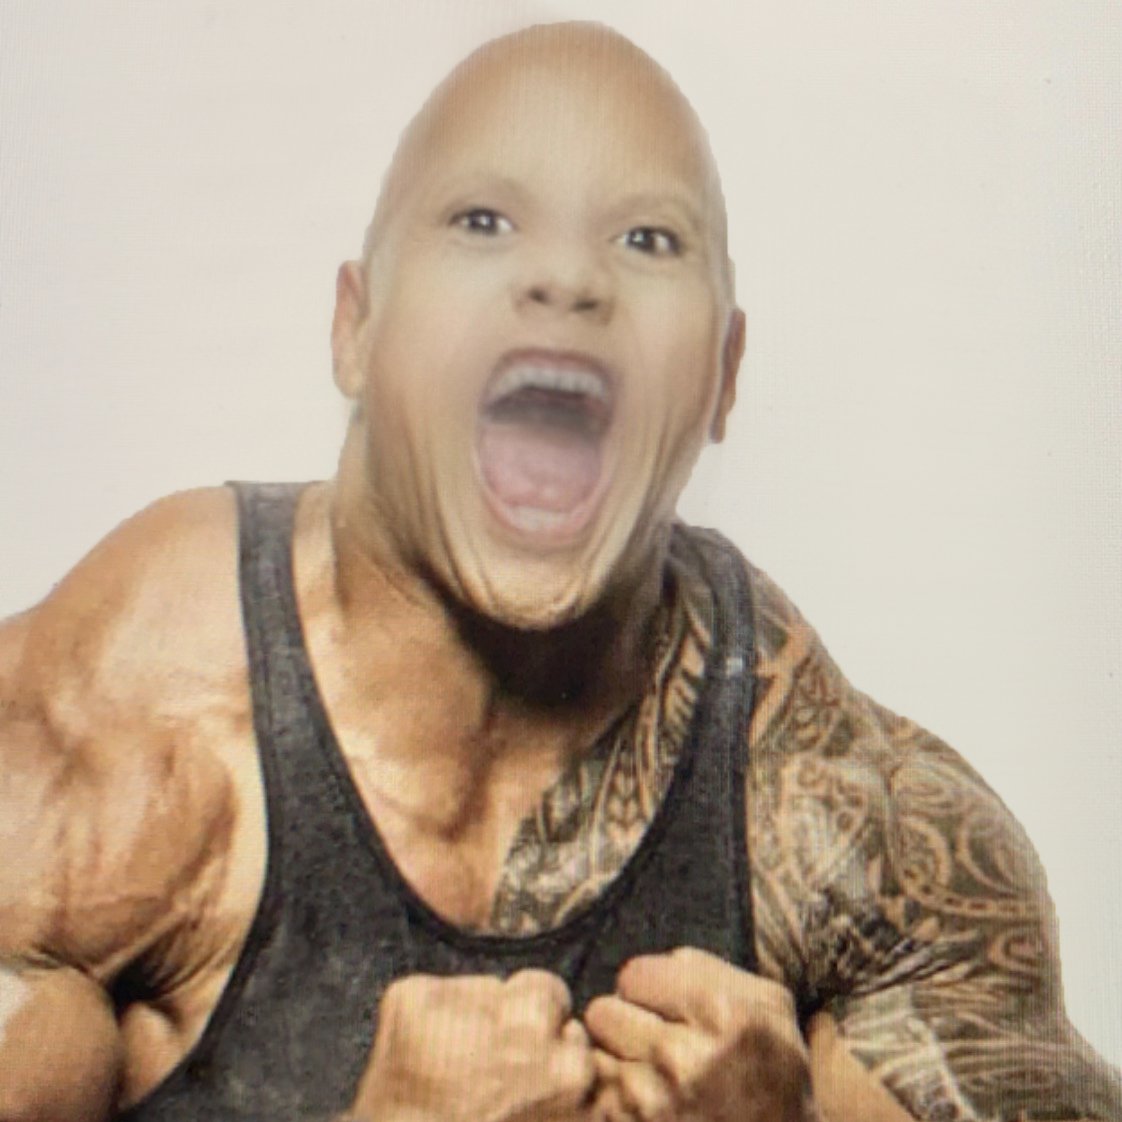 the rock meme with baby